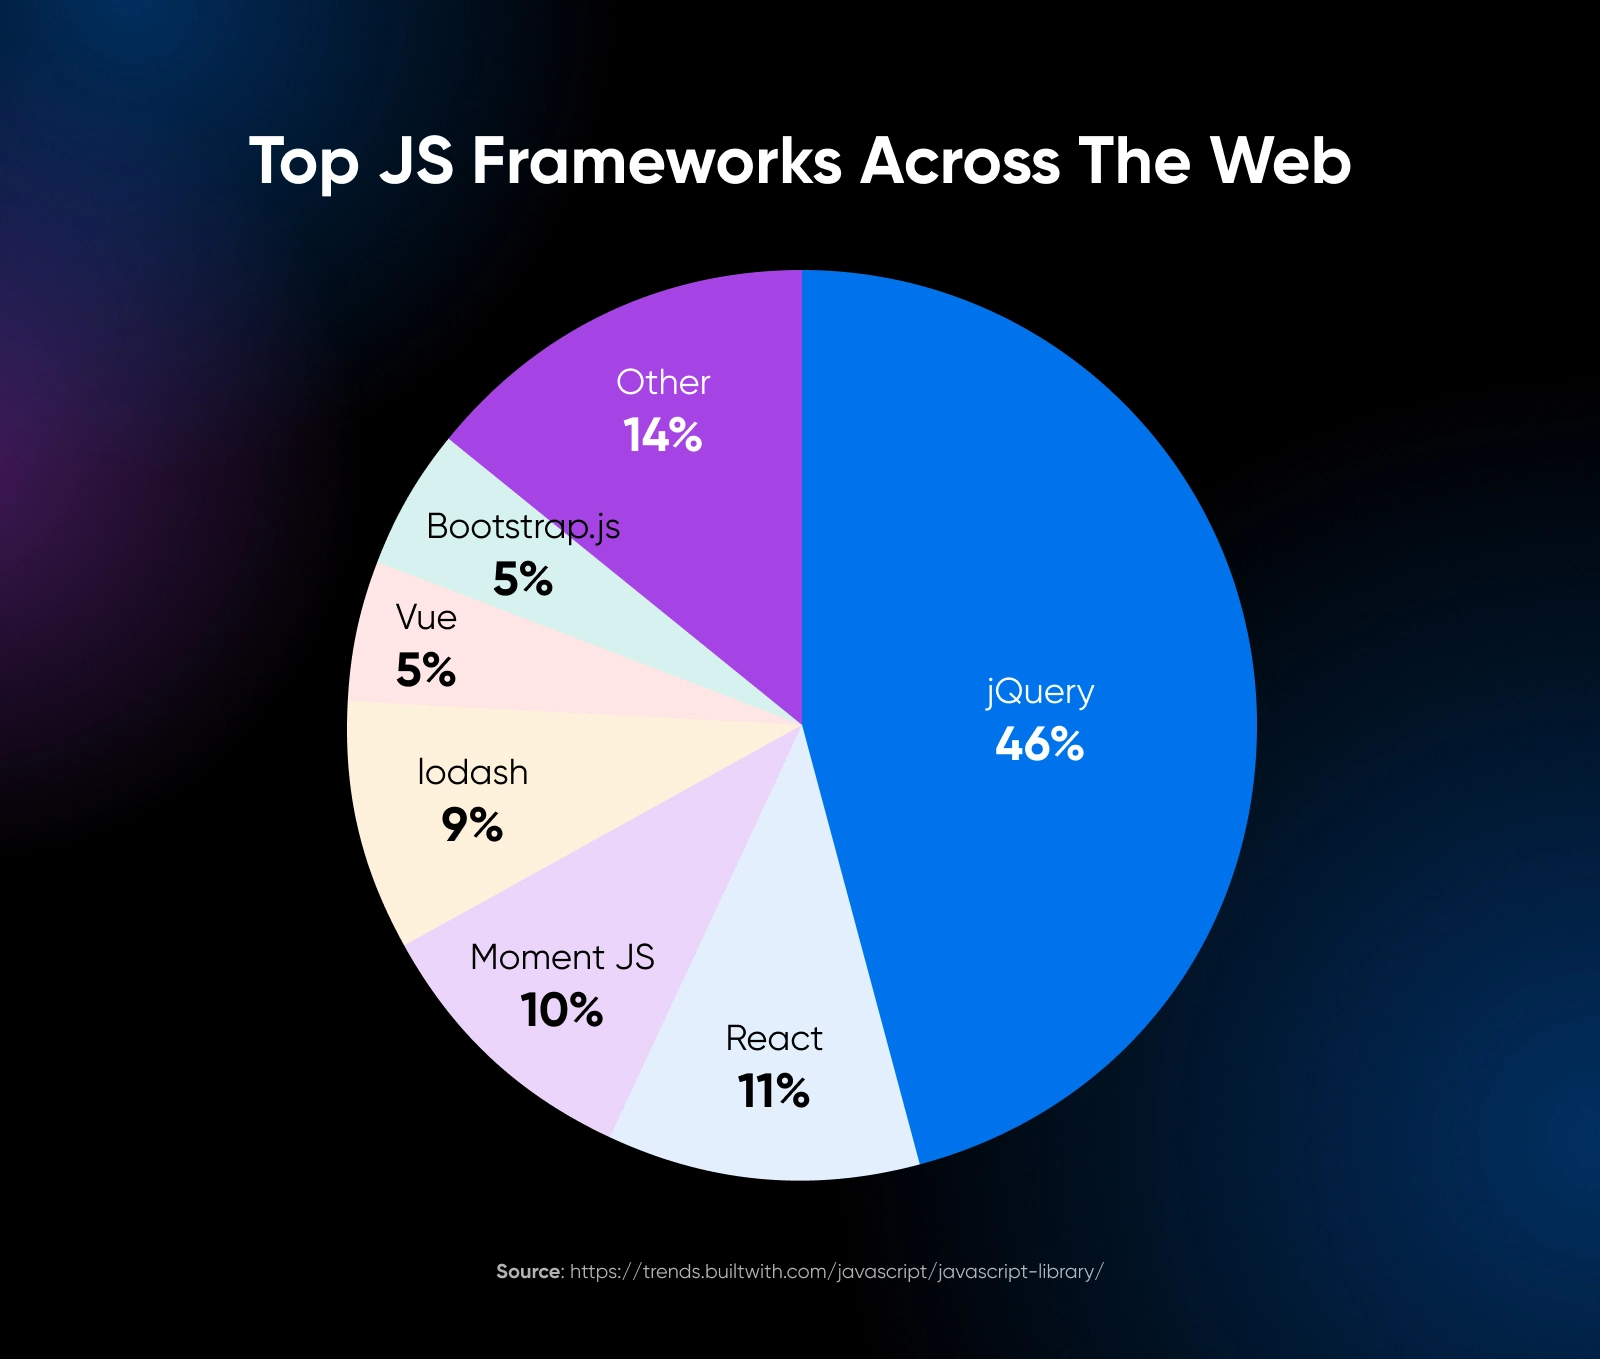 Top JS frameworks across the web include 46% jQuery, 11% React, and 10% Moment JS